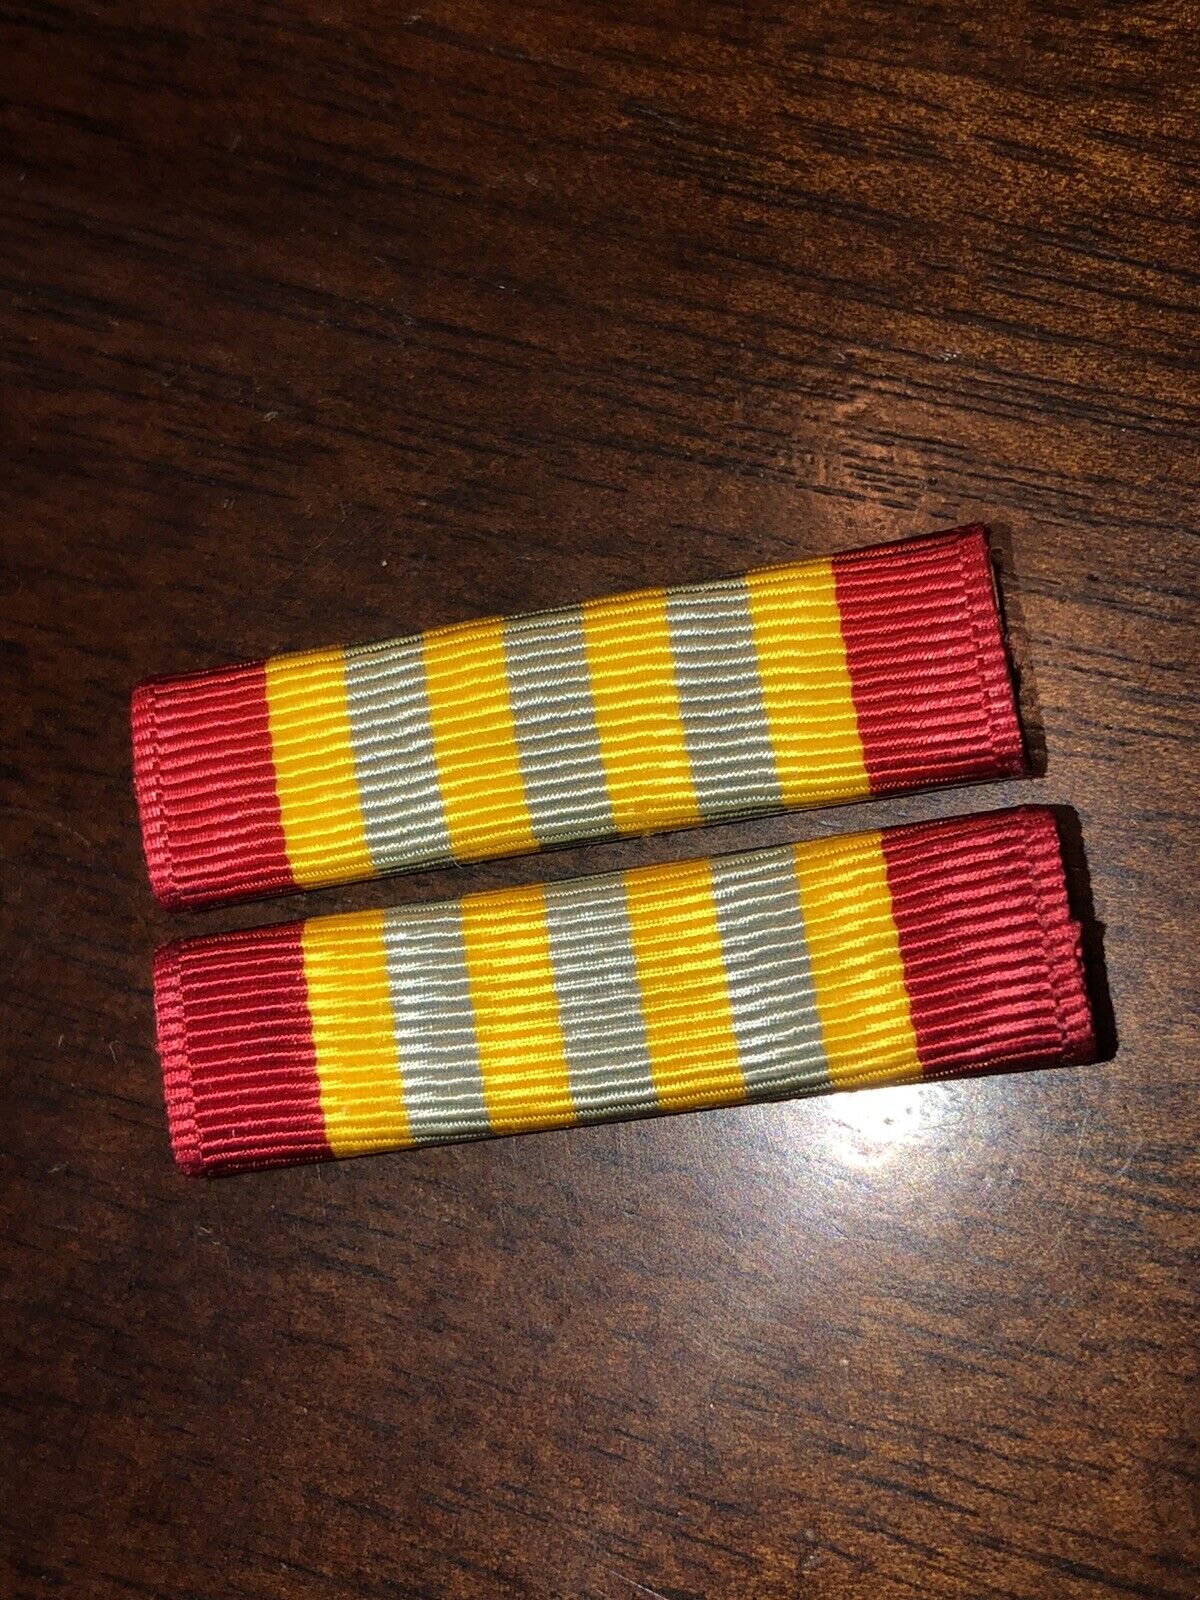 VIETNAM-ARMED FORCES HONOR MEDAL RIBBON ~ 2nd Class / (RVN Military Award)